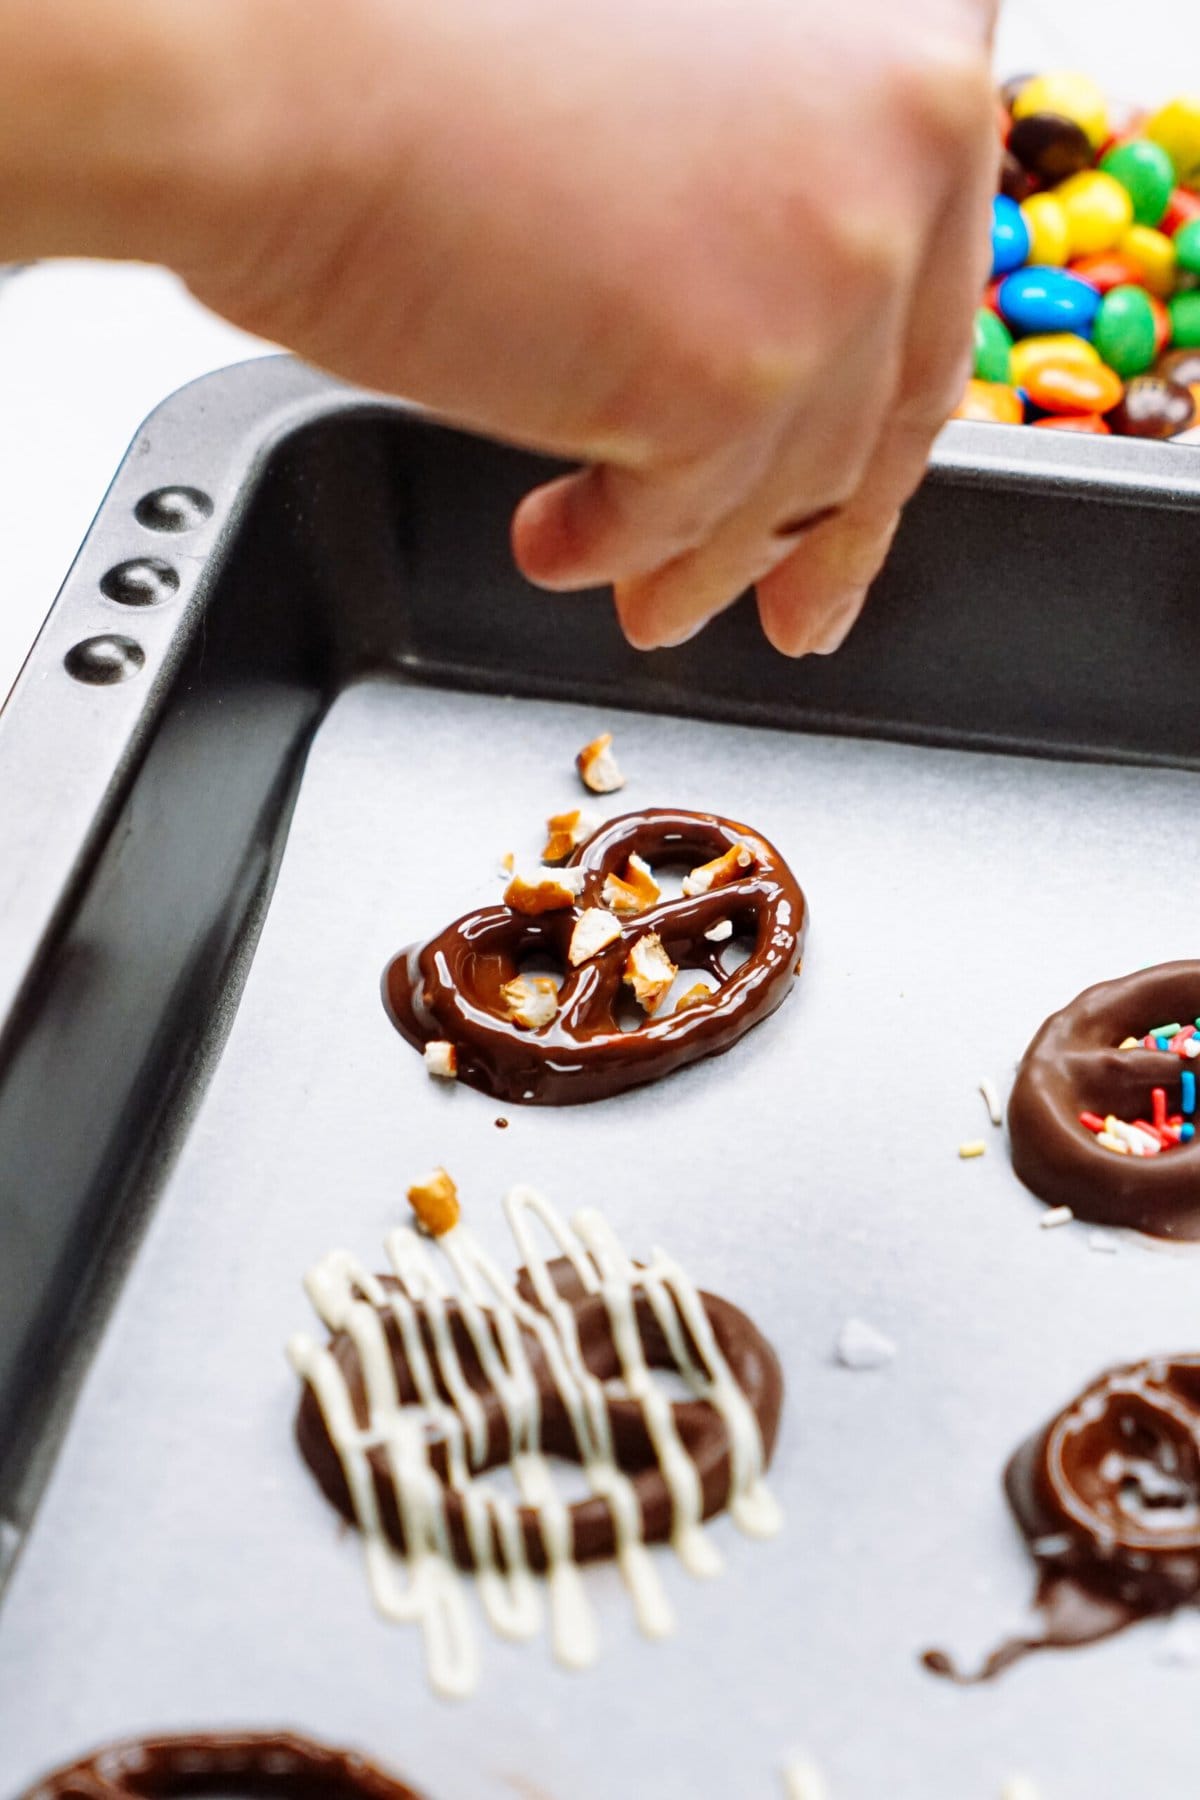 A person is putting crushed pretzel pieces on a chocolate covrered pretzel on a baking sheet.